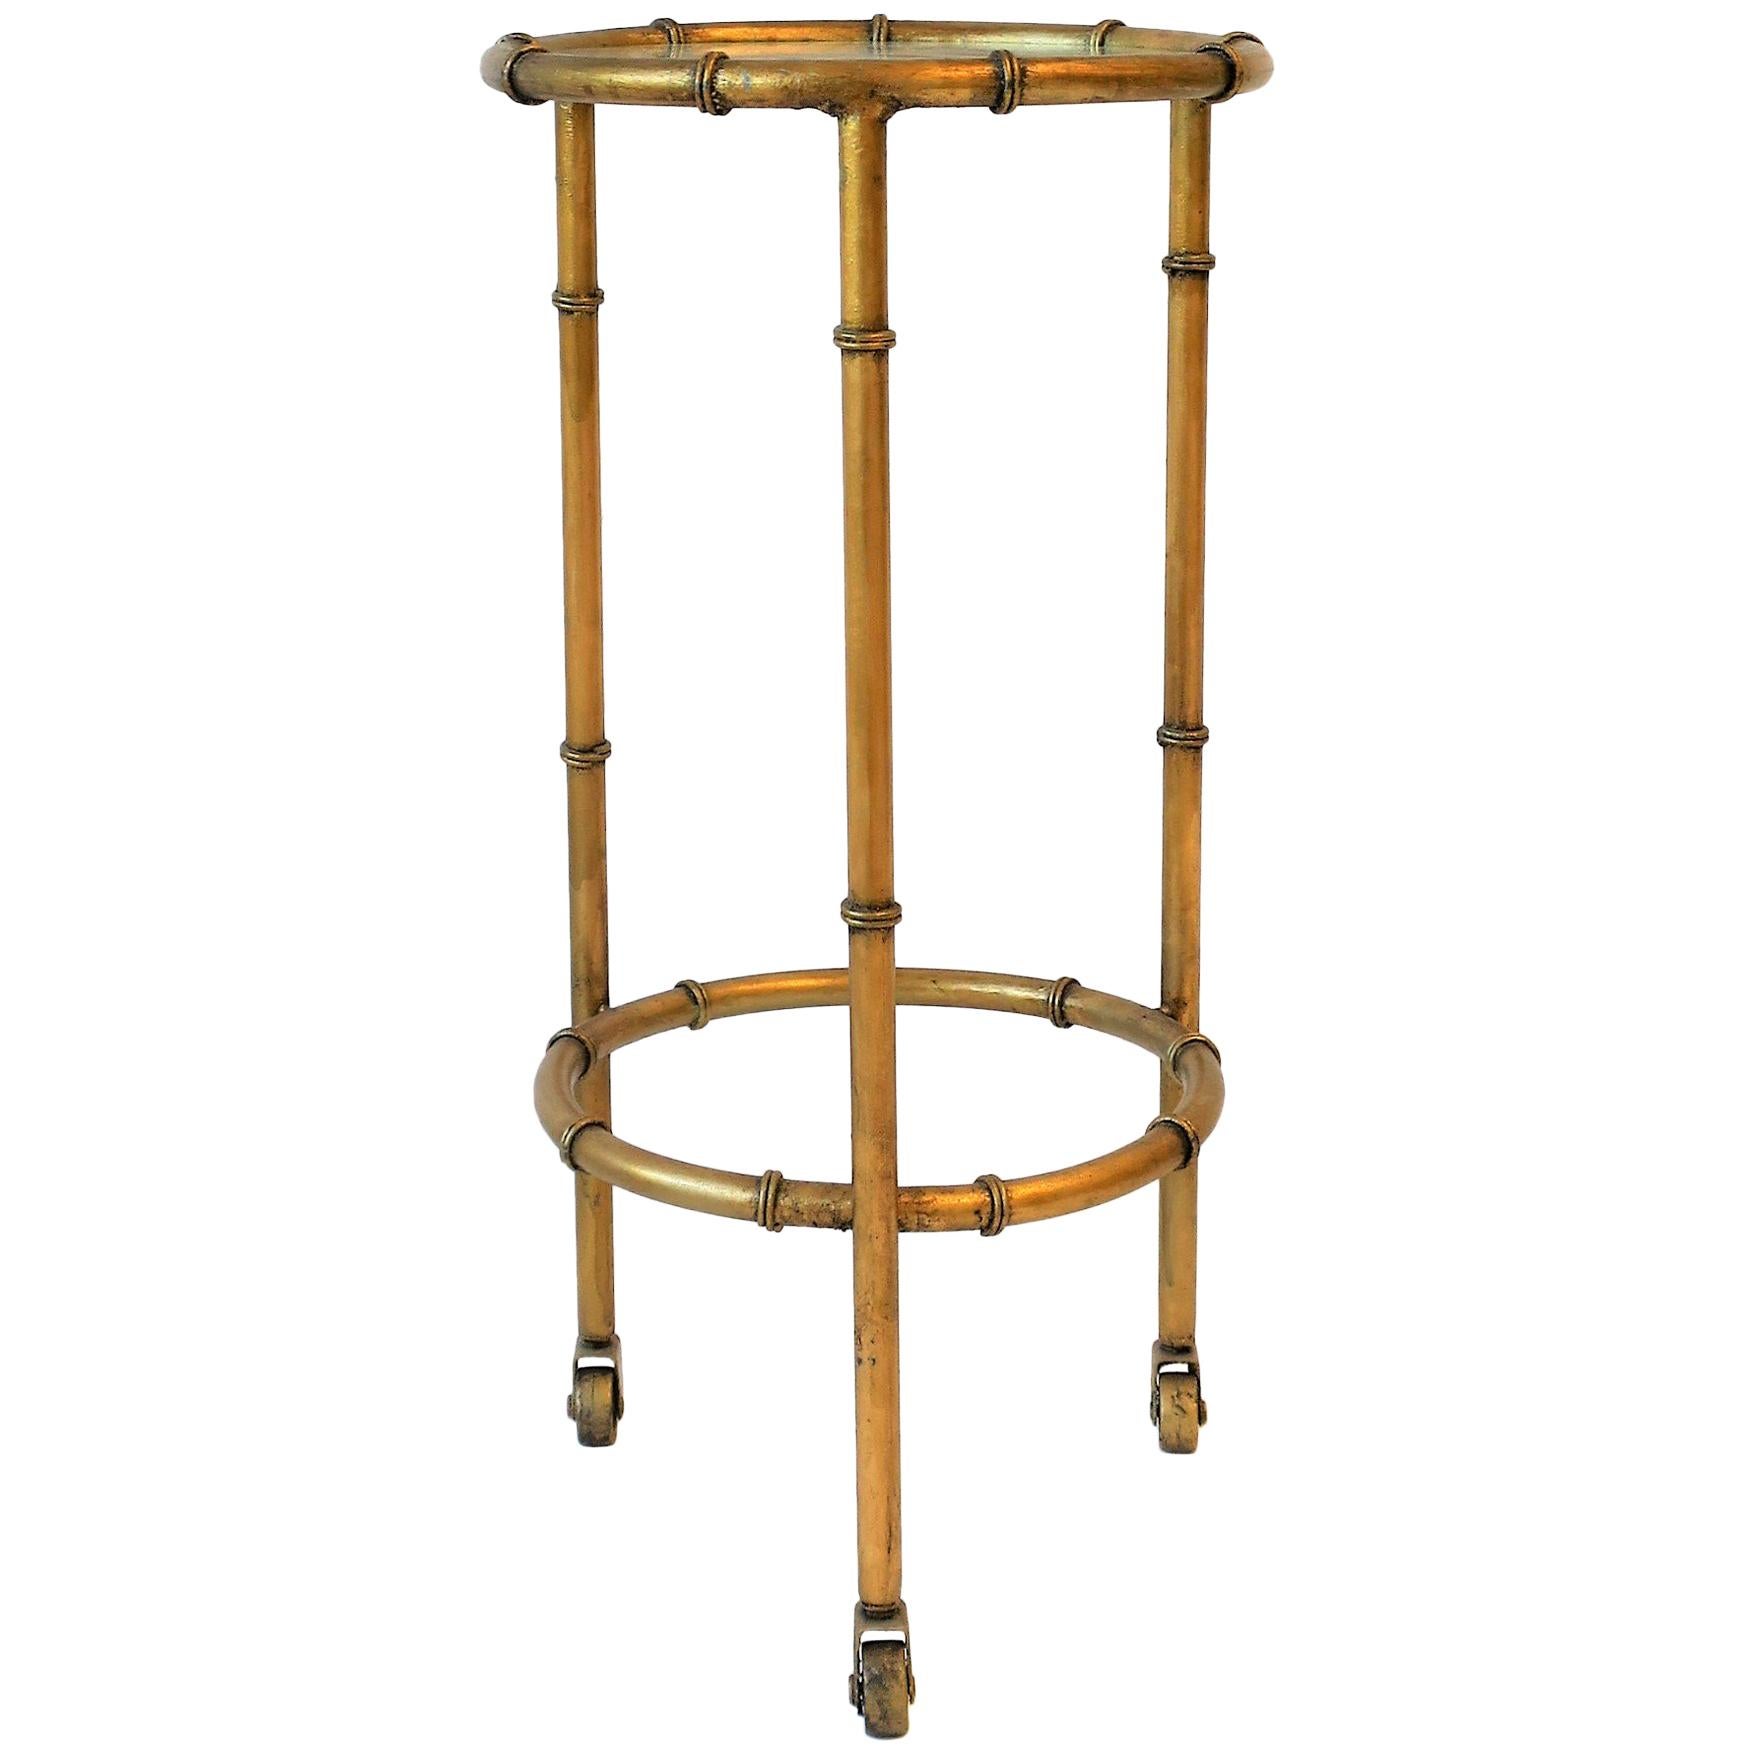 A beautiful round gold gilt metal and glass top side or drinks table on small caster wheels. 

Table measures: 23